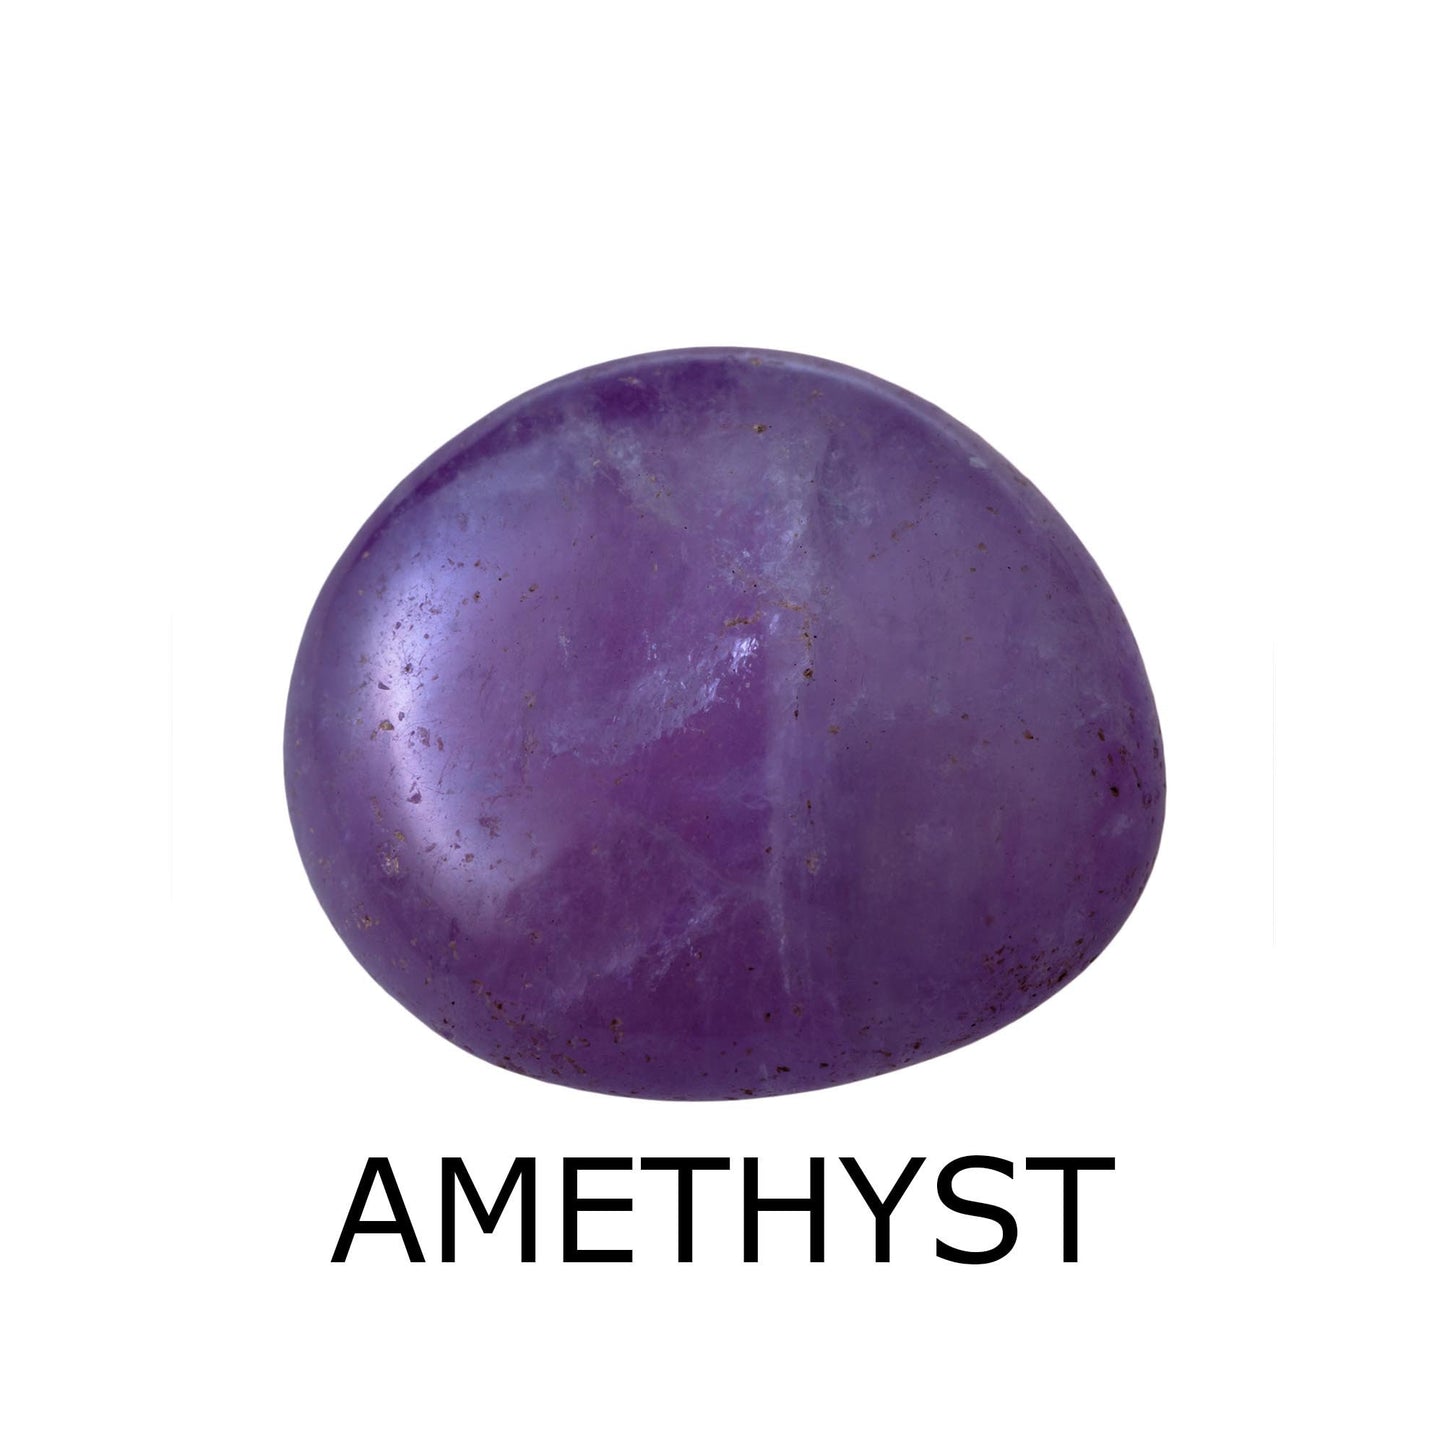 amethyst tumbled stone with label